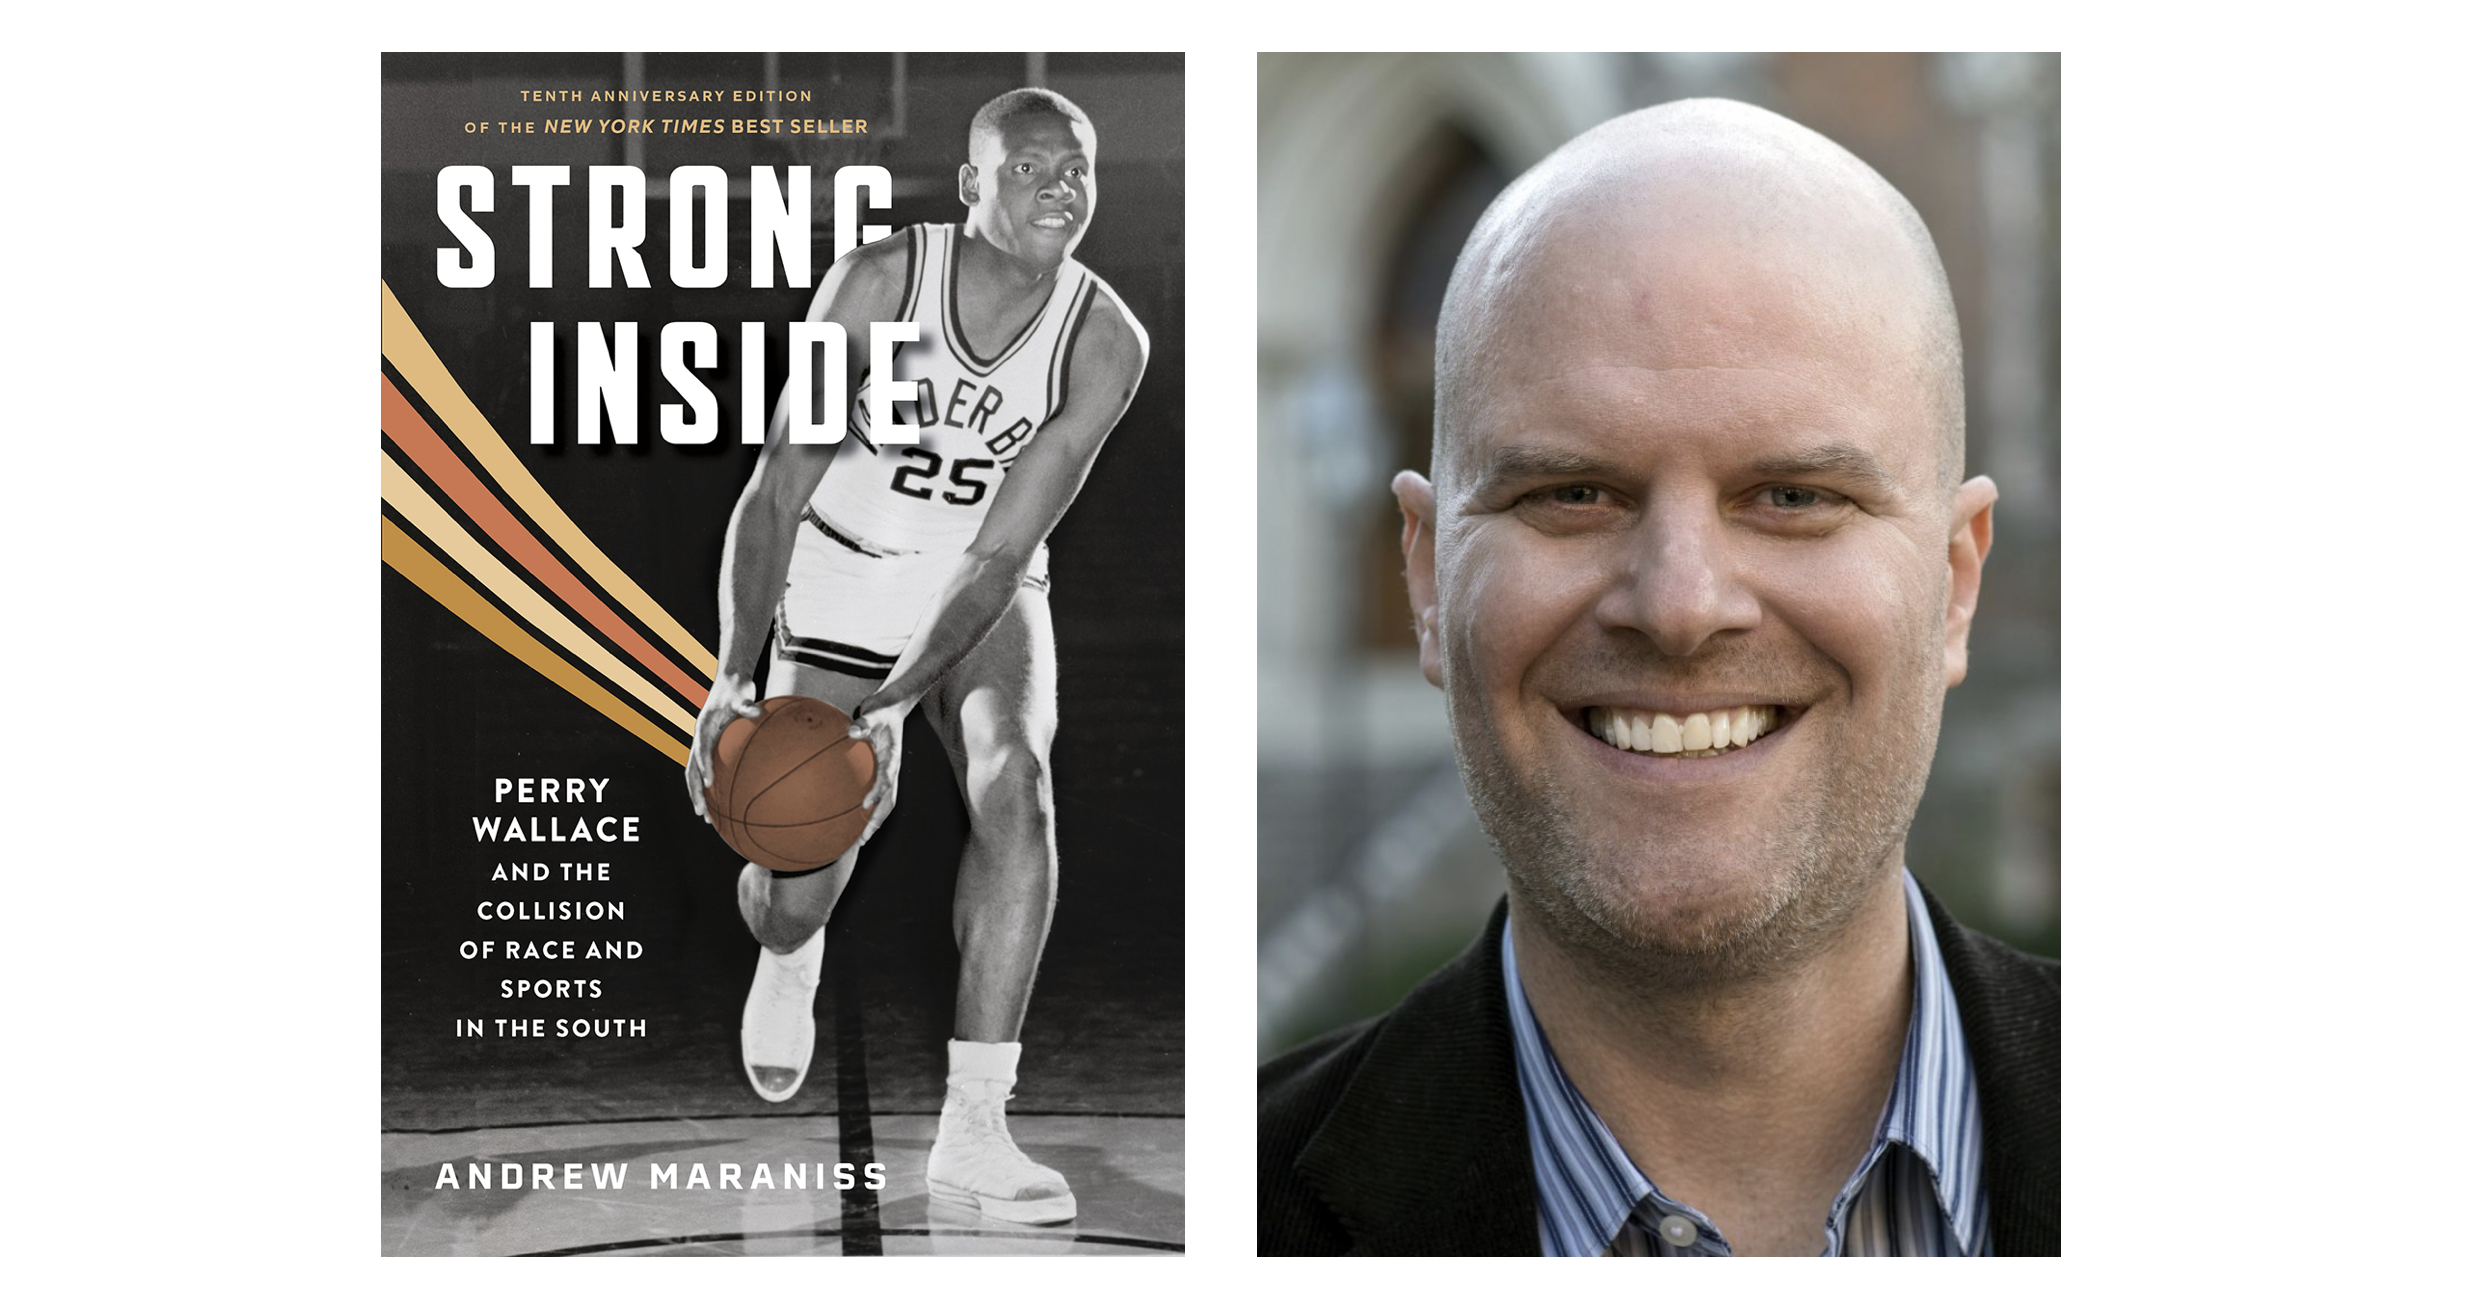 From LeBron James to Maya Moore, Author Andrew Maraniss Latest Work is for Every Generation of Hoops Fans